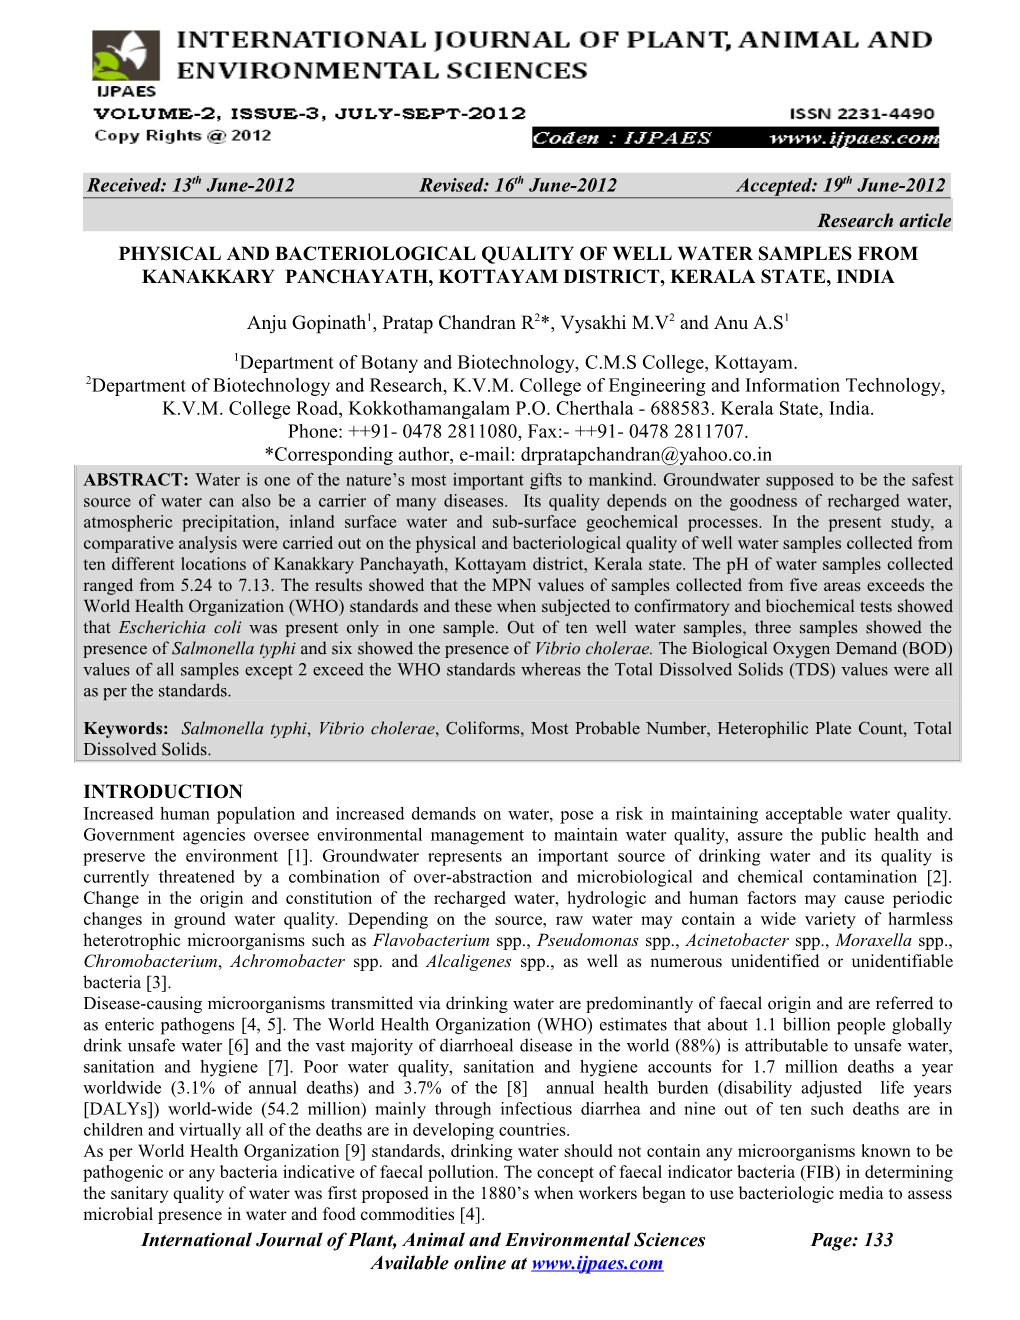 Physical and Bacteriological Quality of Well Water Samples from Kanakkary Panchayath, Kottayam District, Kerala State, India